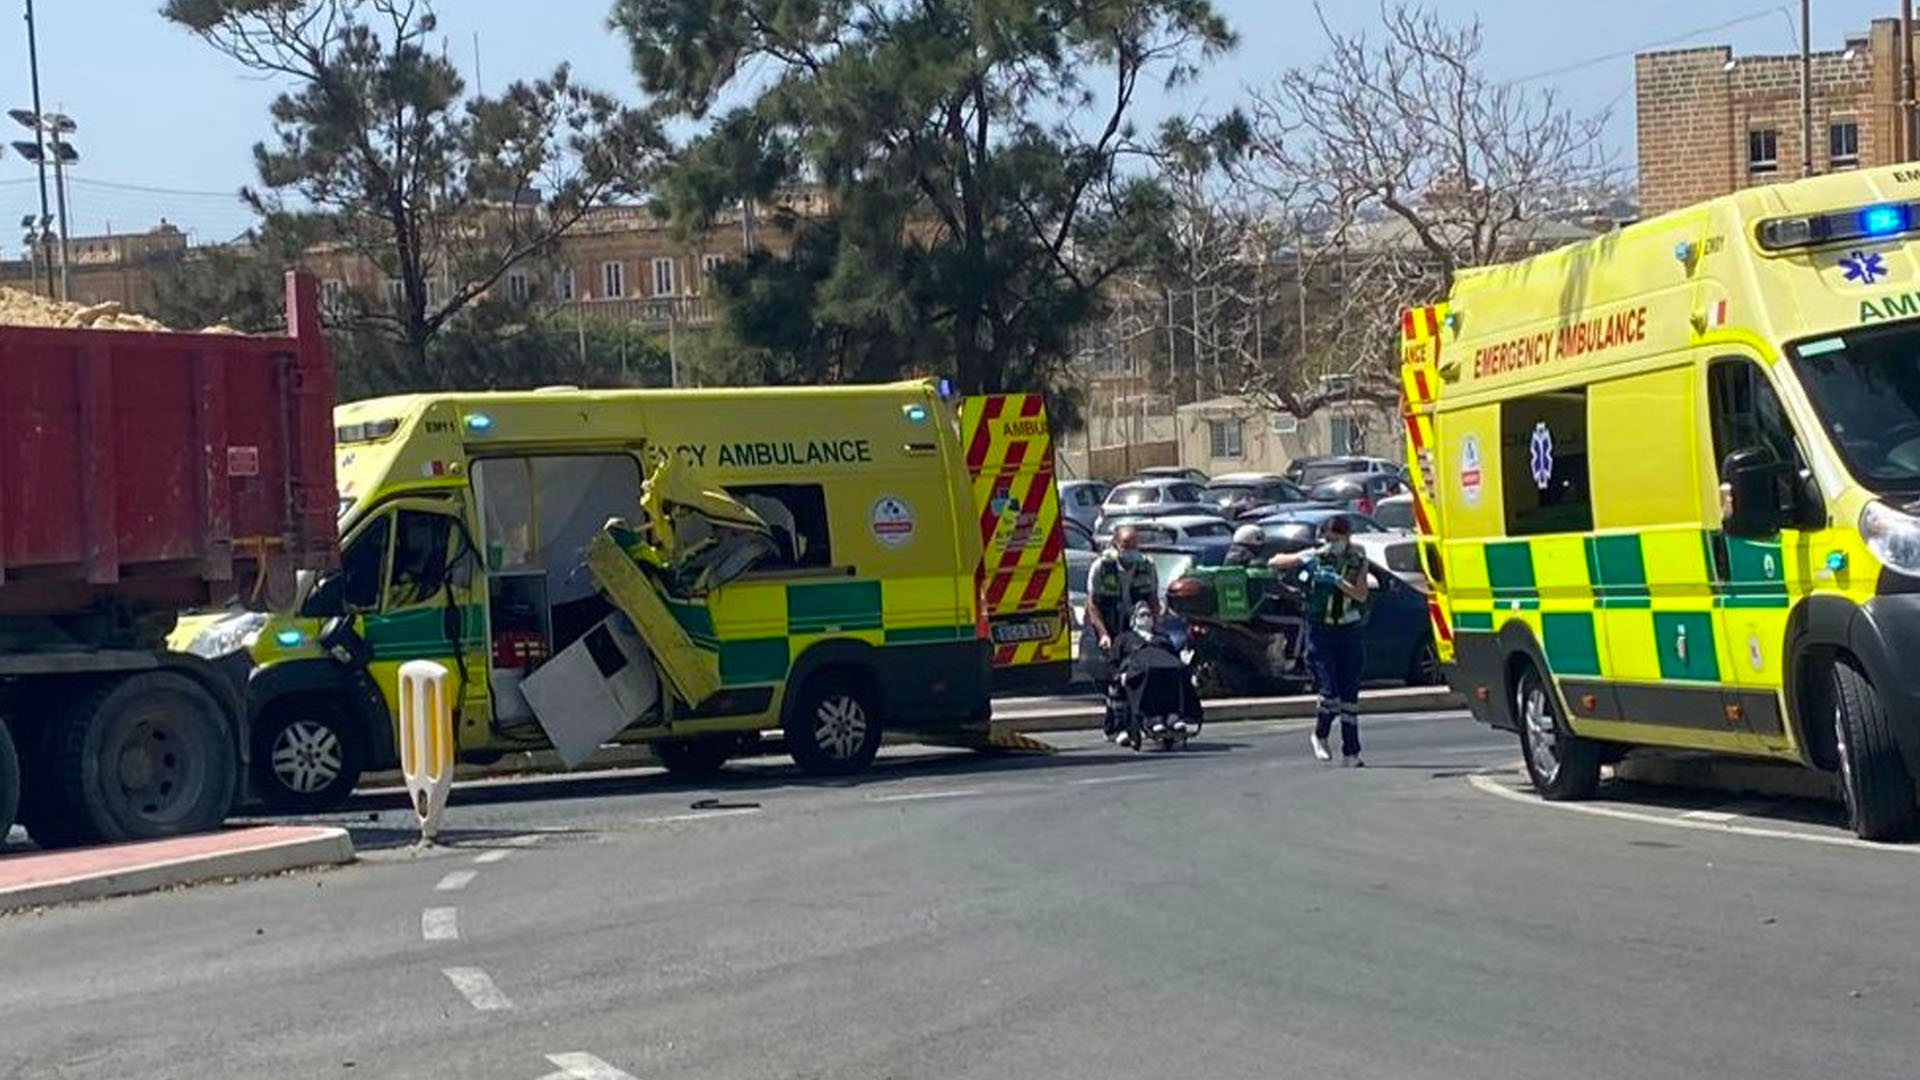 90-year-old nun grievously injured in ambulance collision